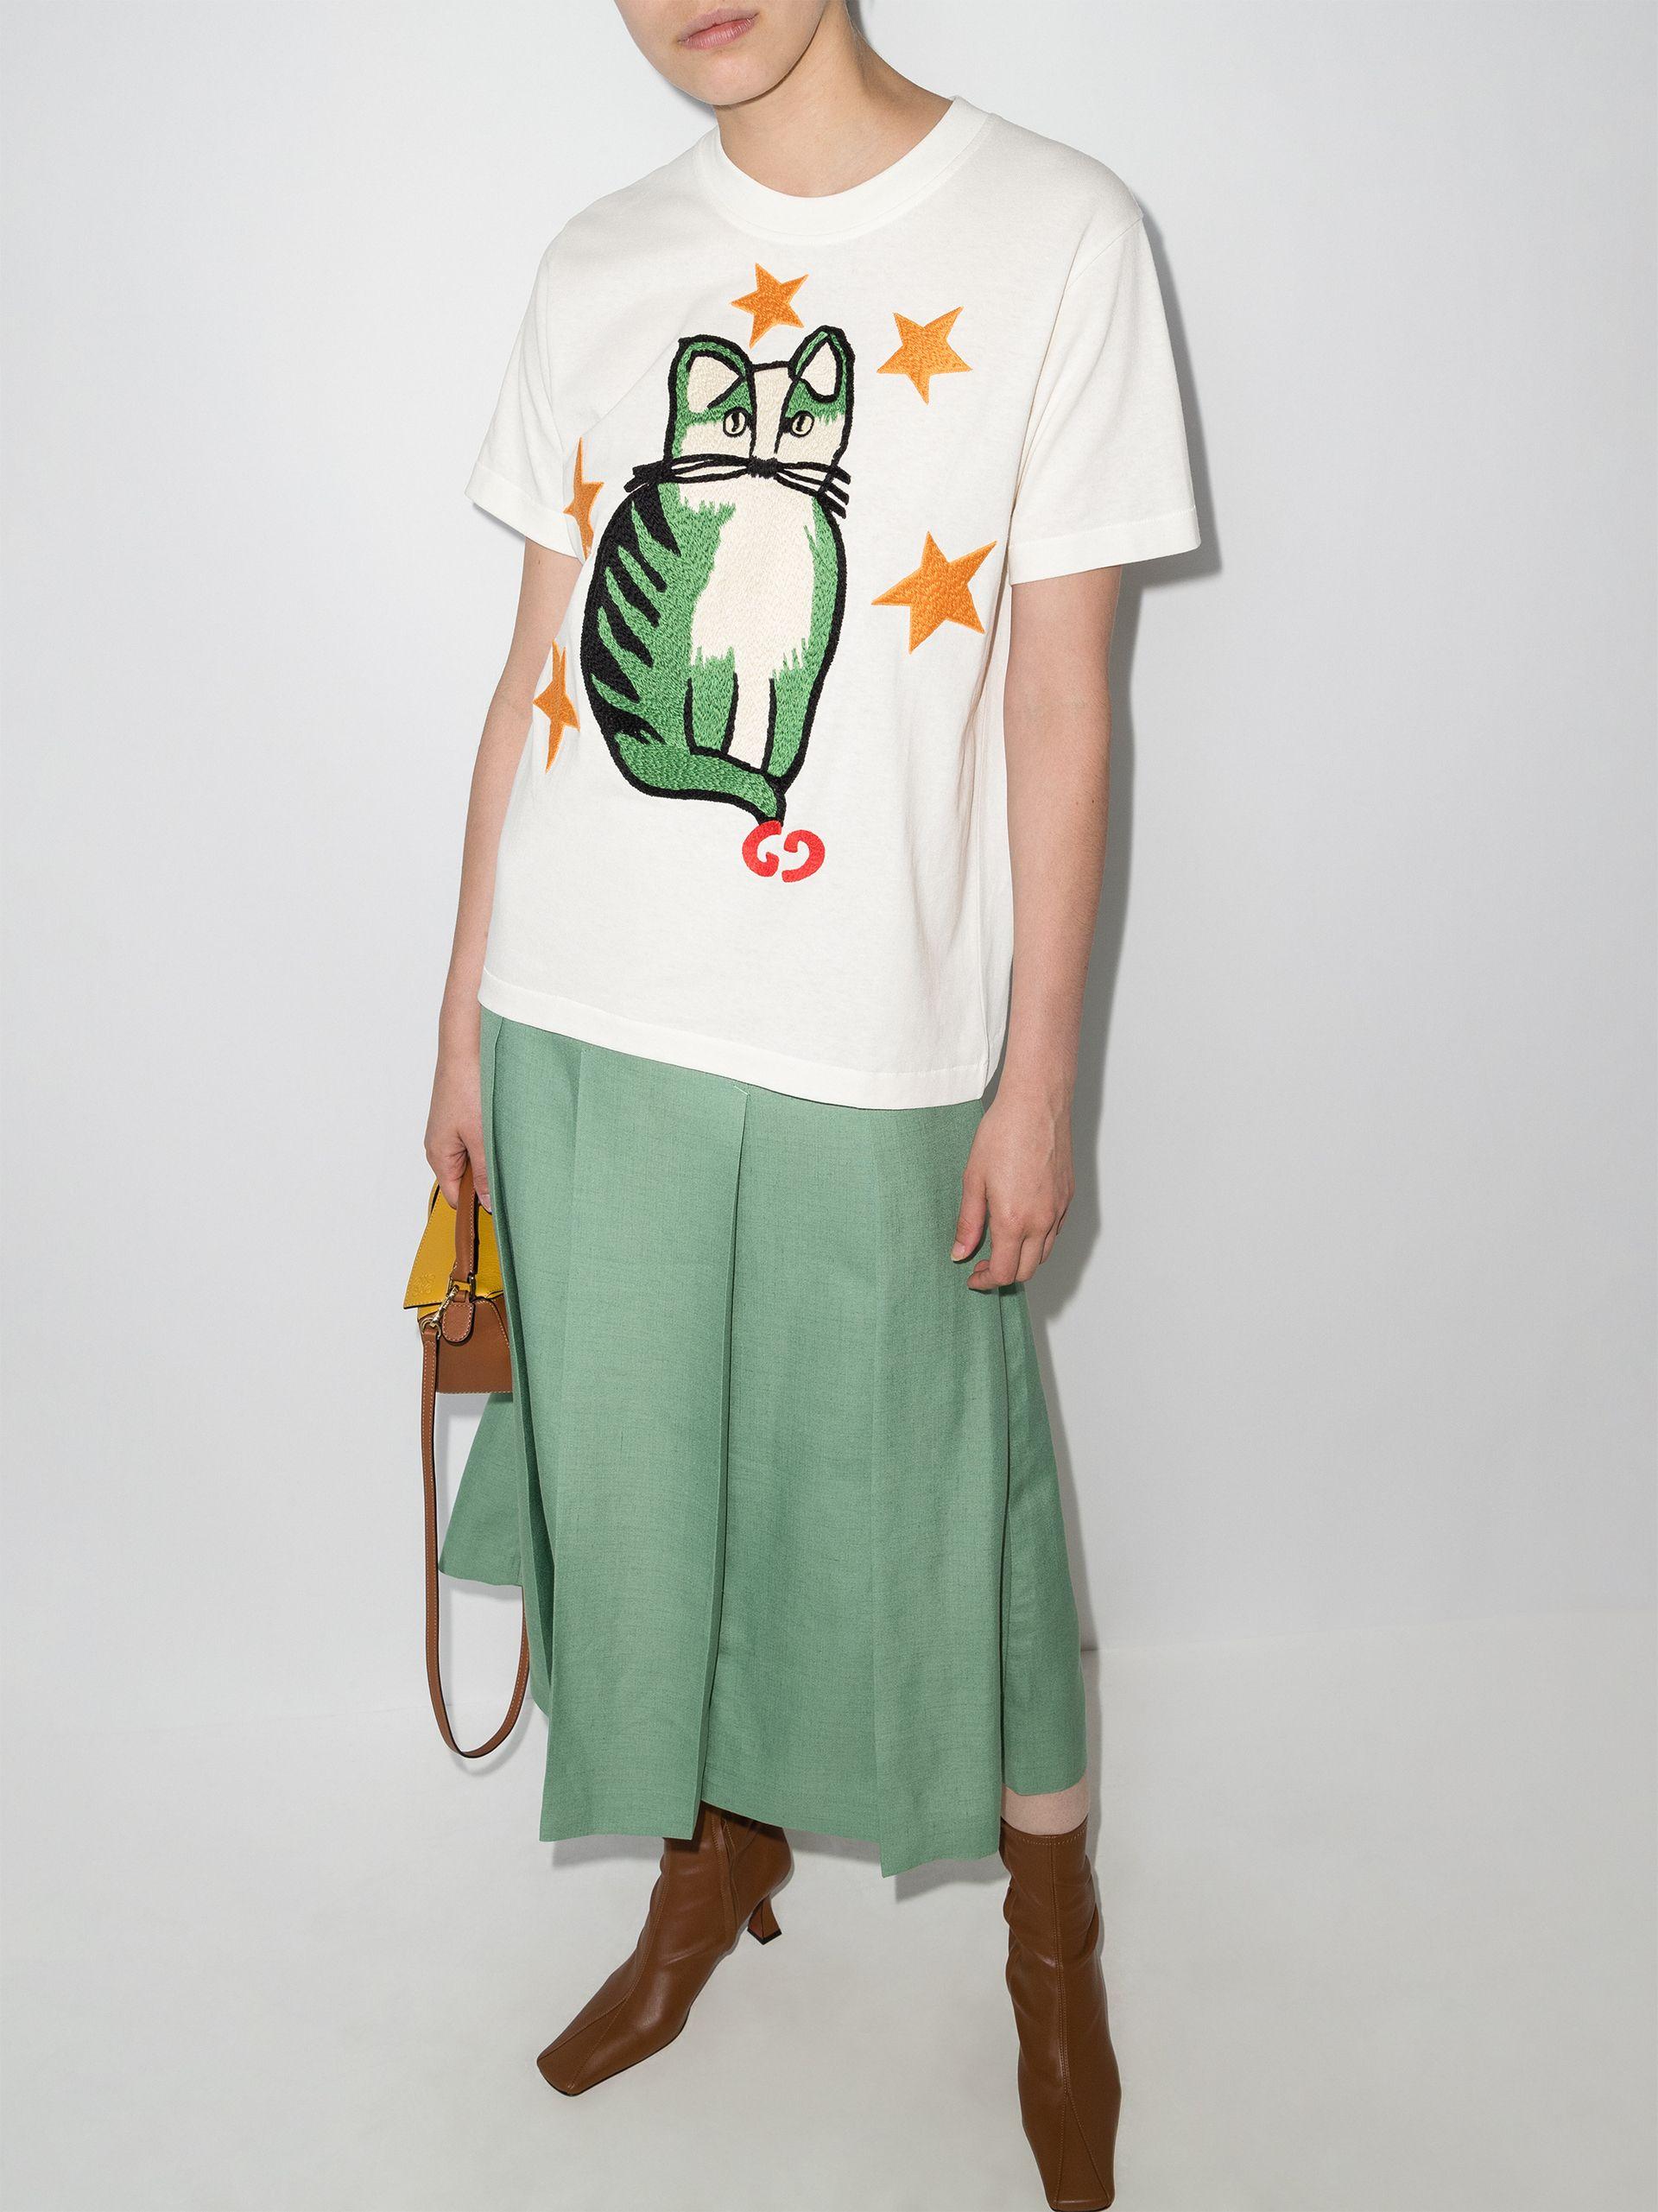 Gucci Star Cat Embroidered T-shirt in White | Lyst